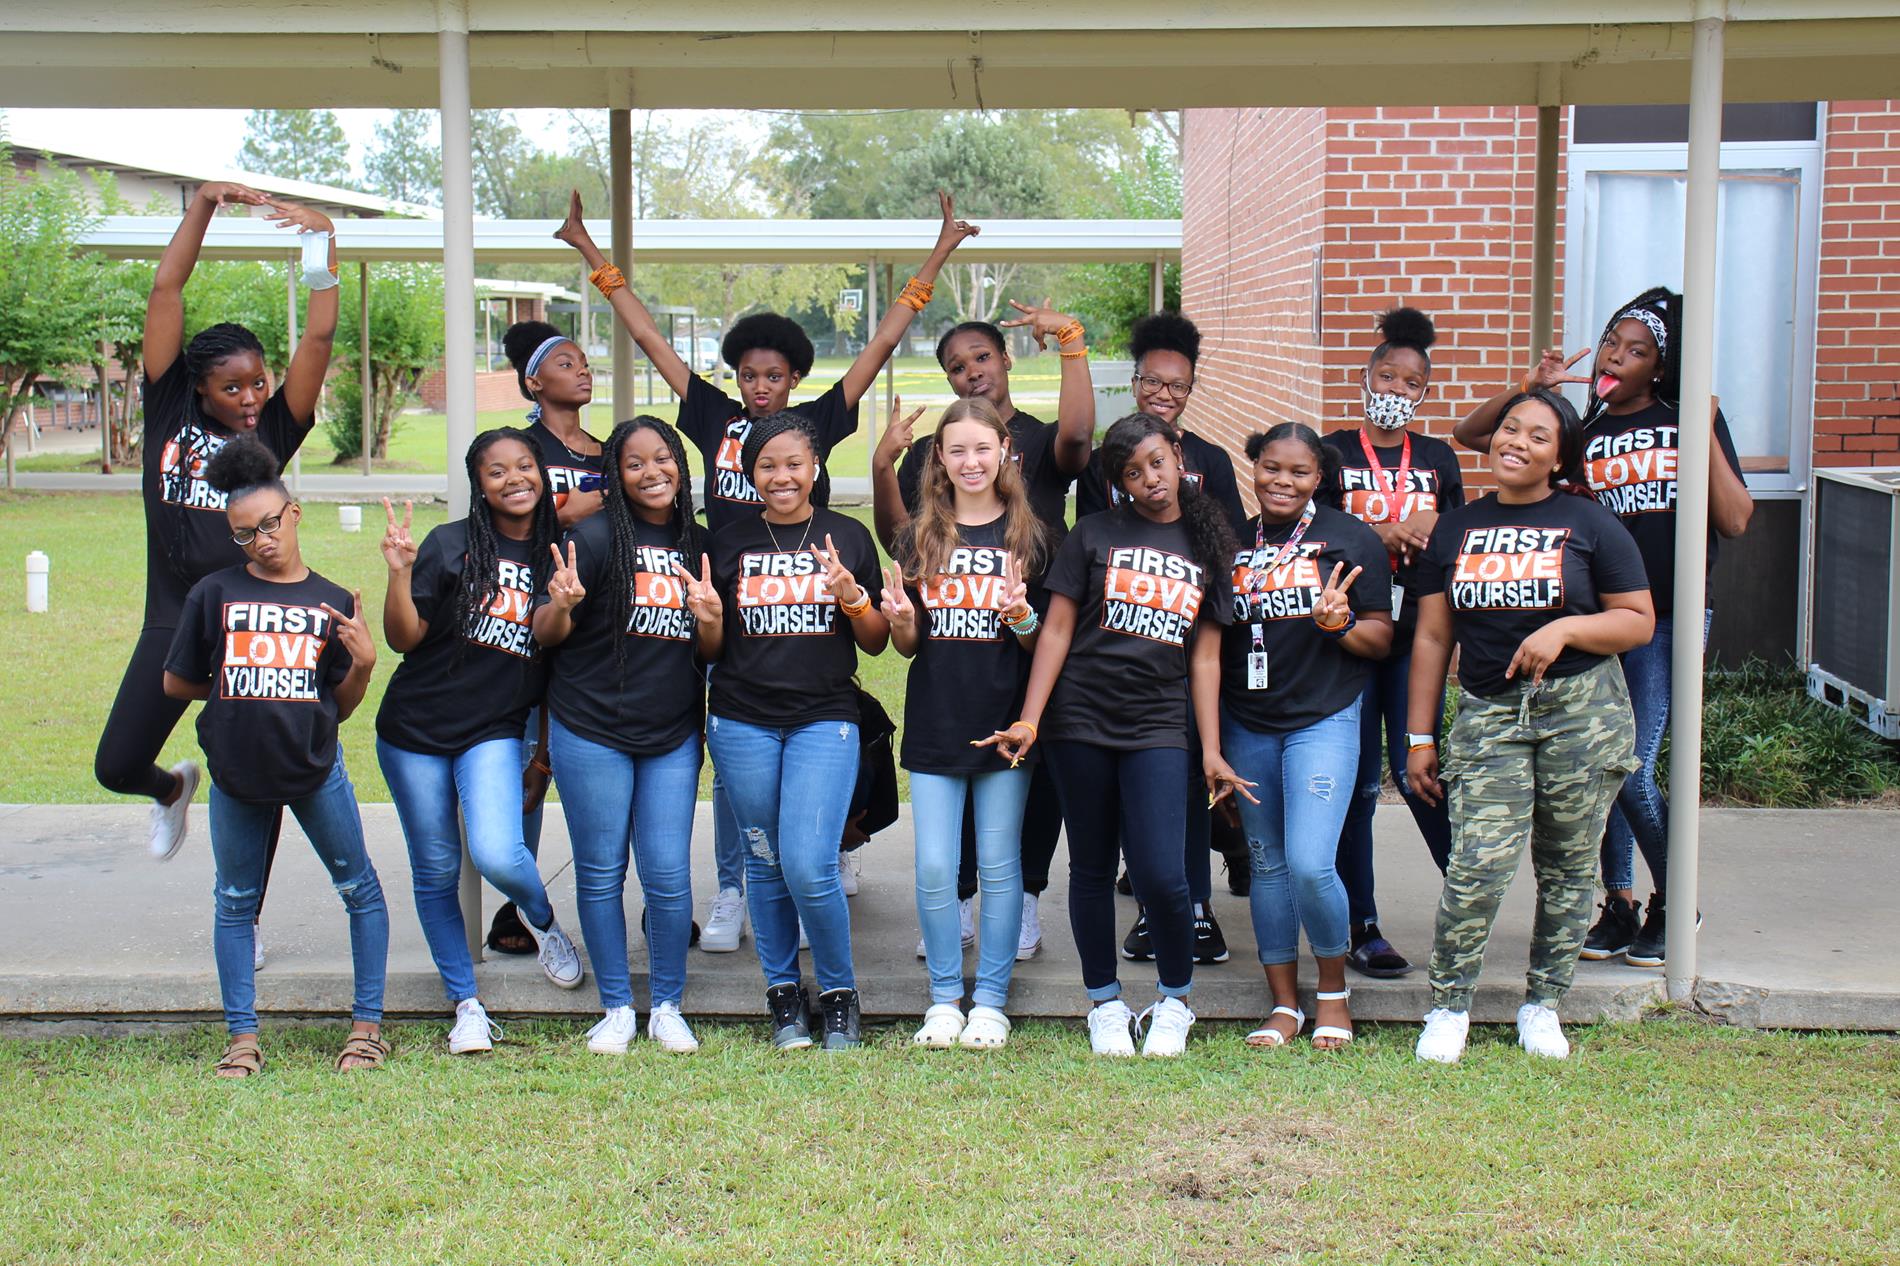 Girls in matching black Unity Day shirts pose for a Silly Group Photo